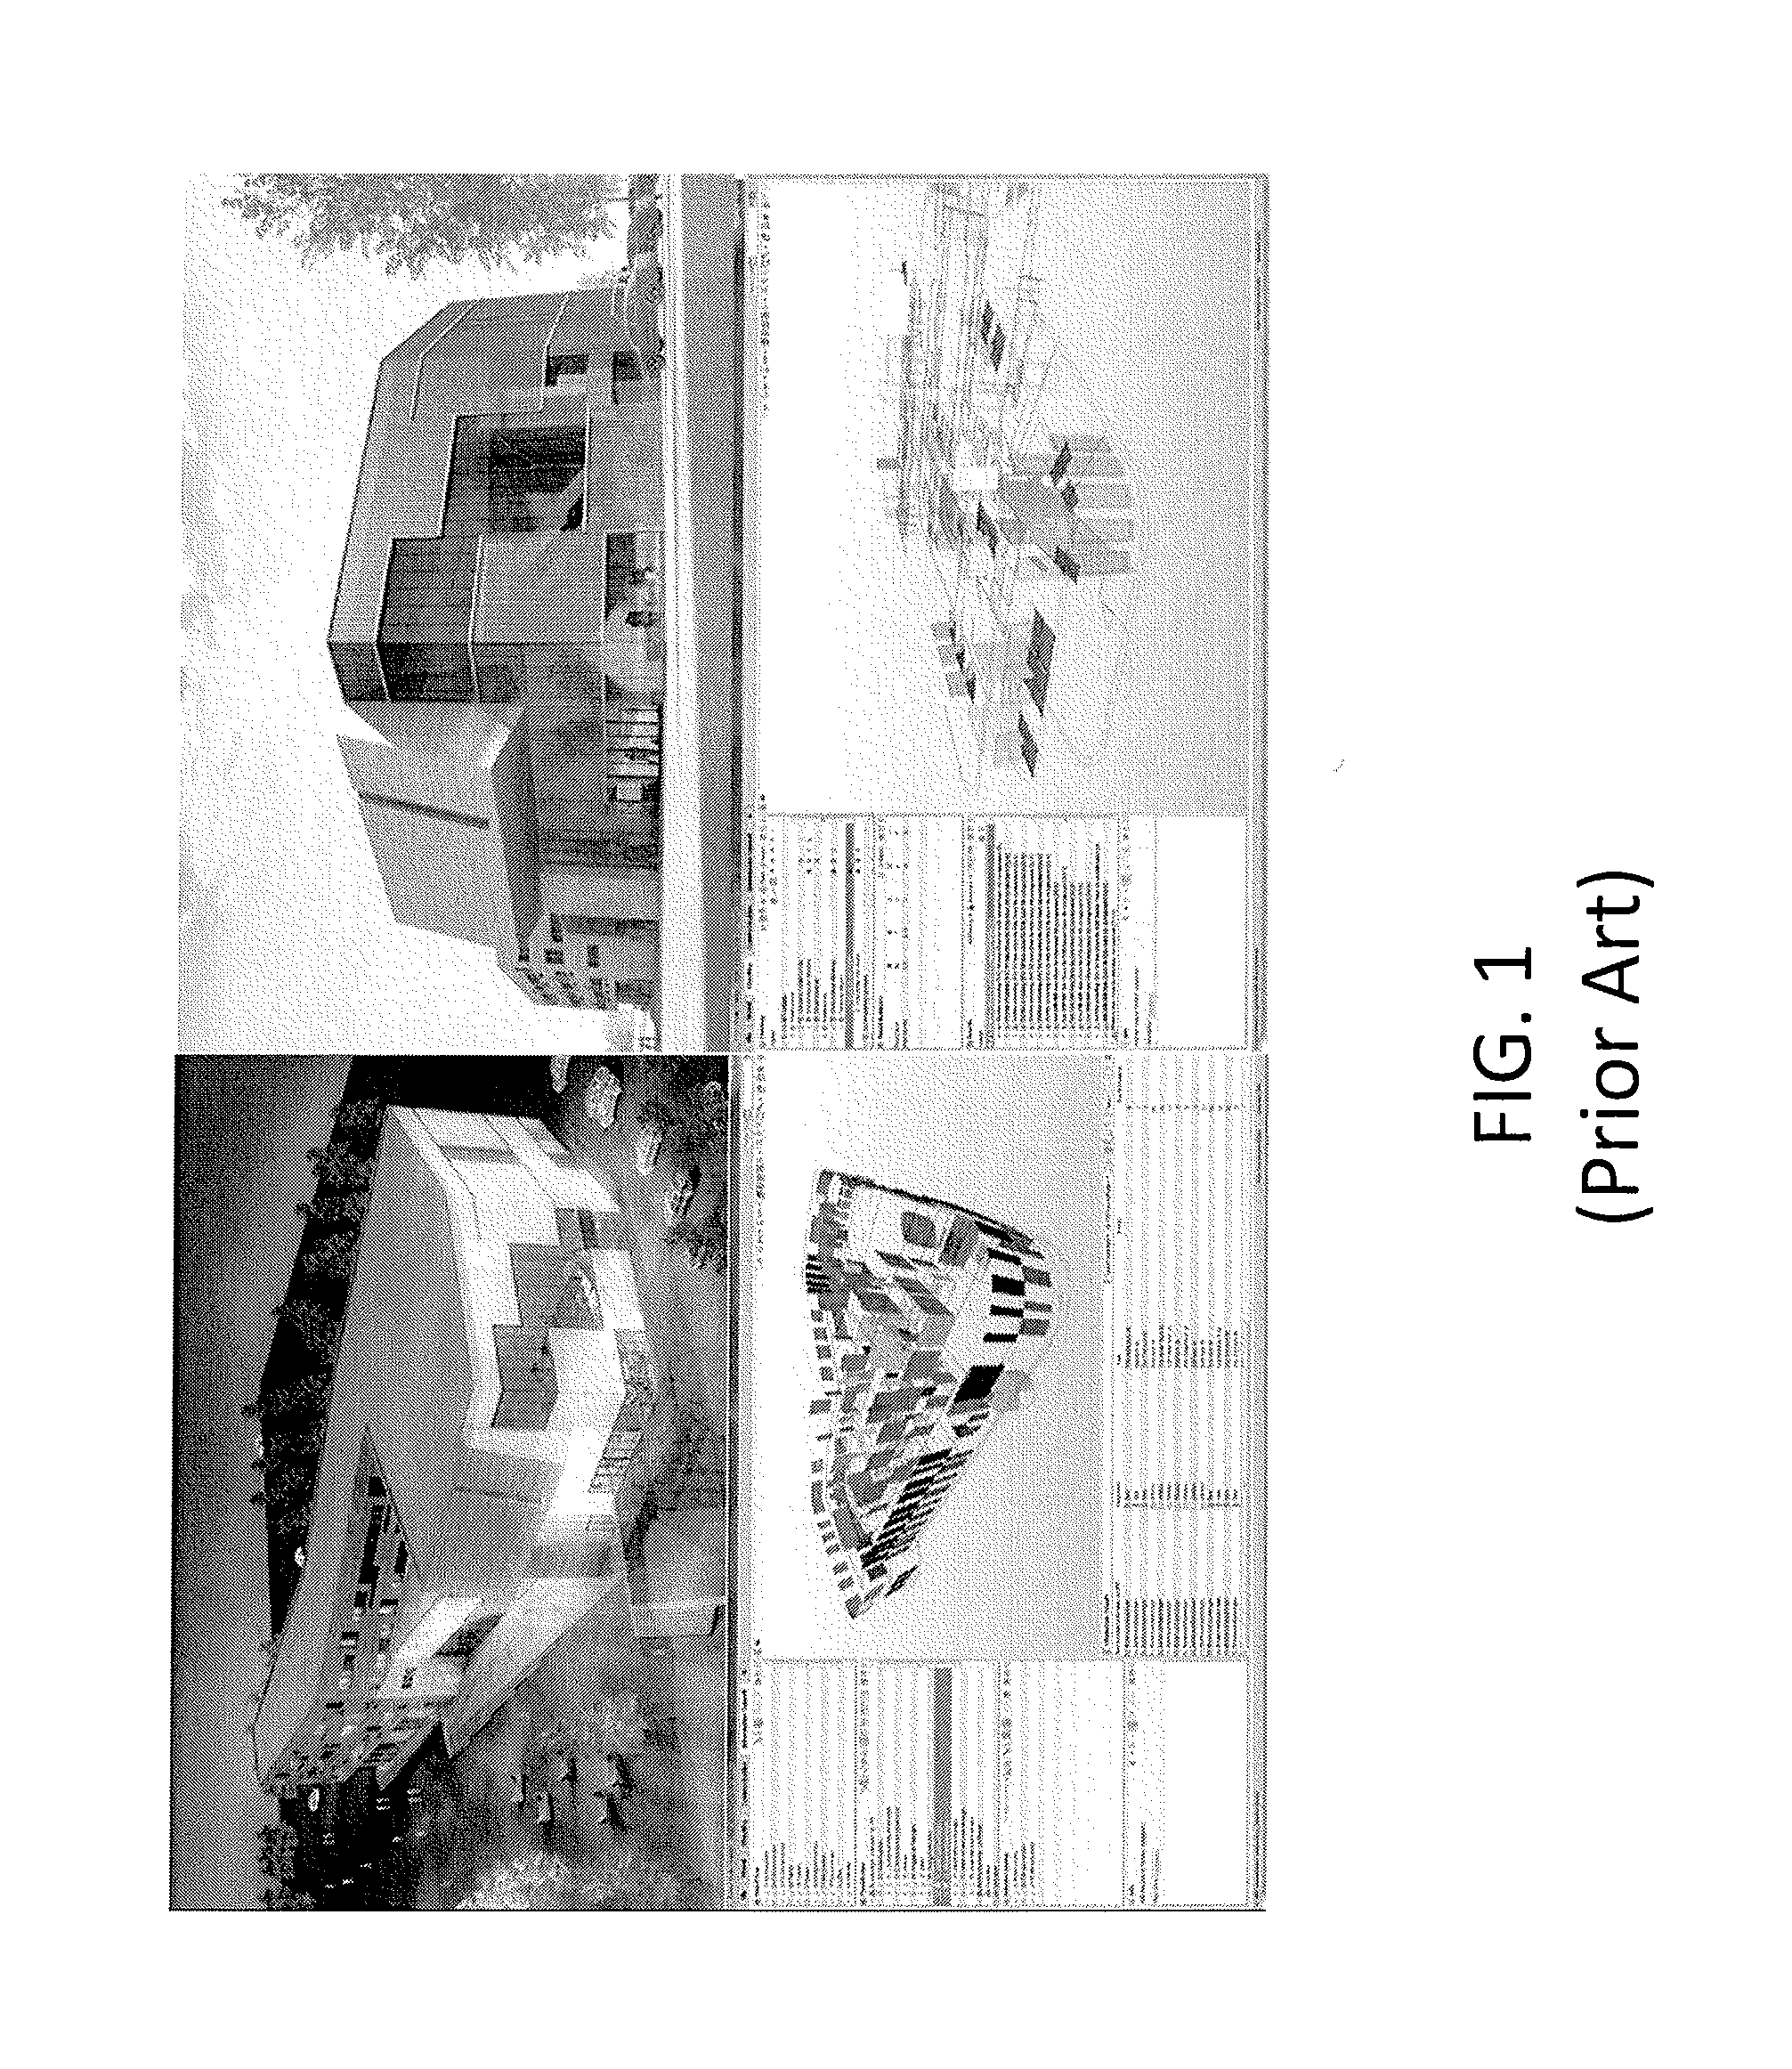 System and Method for Express Spreadsheet Visualization for Building Information Modeling